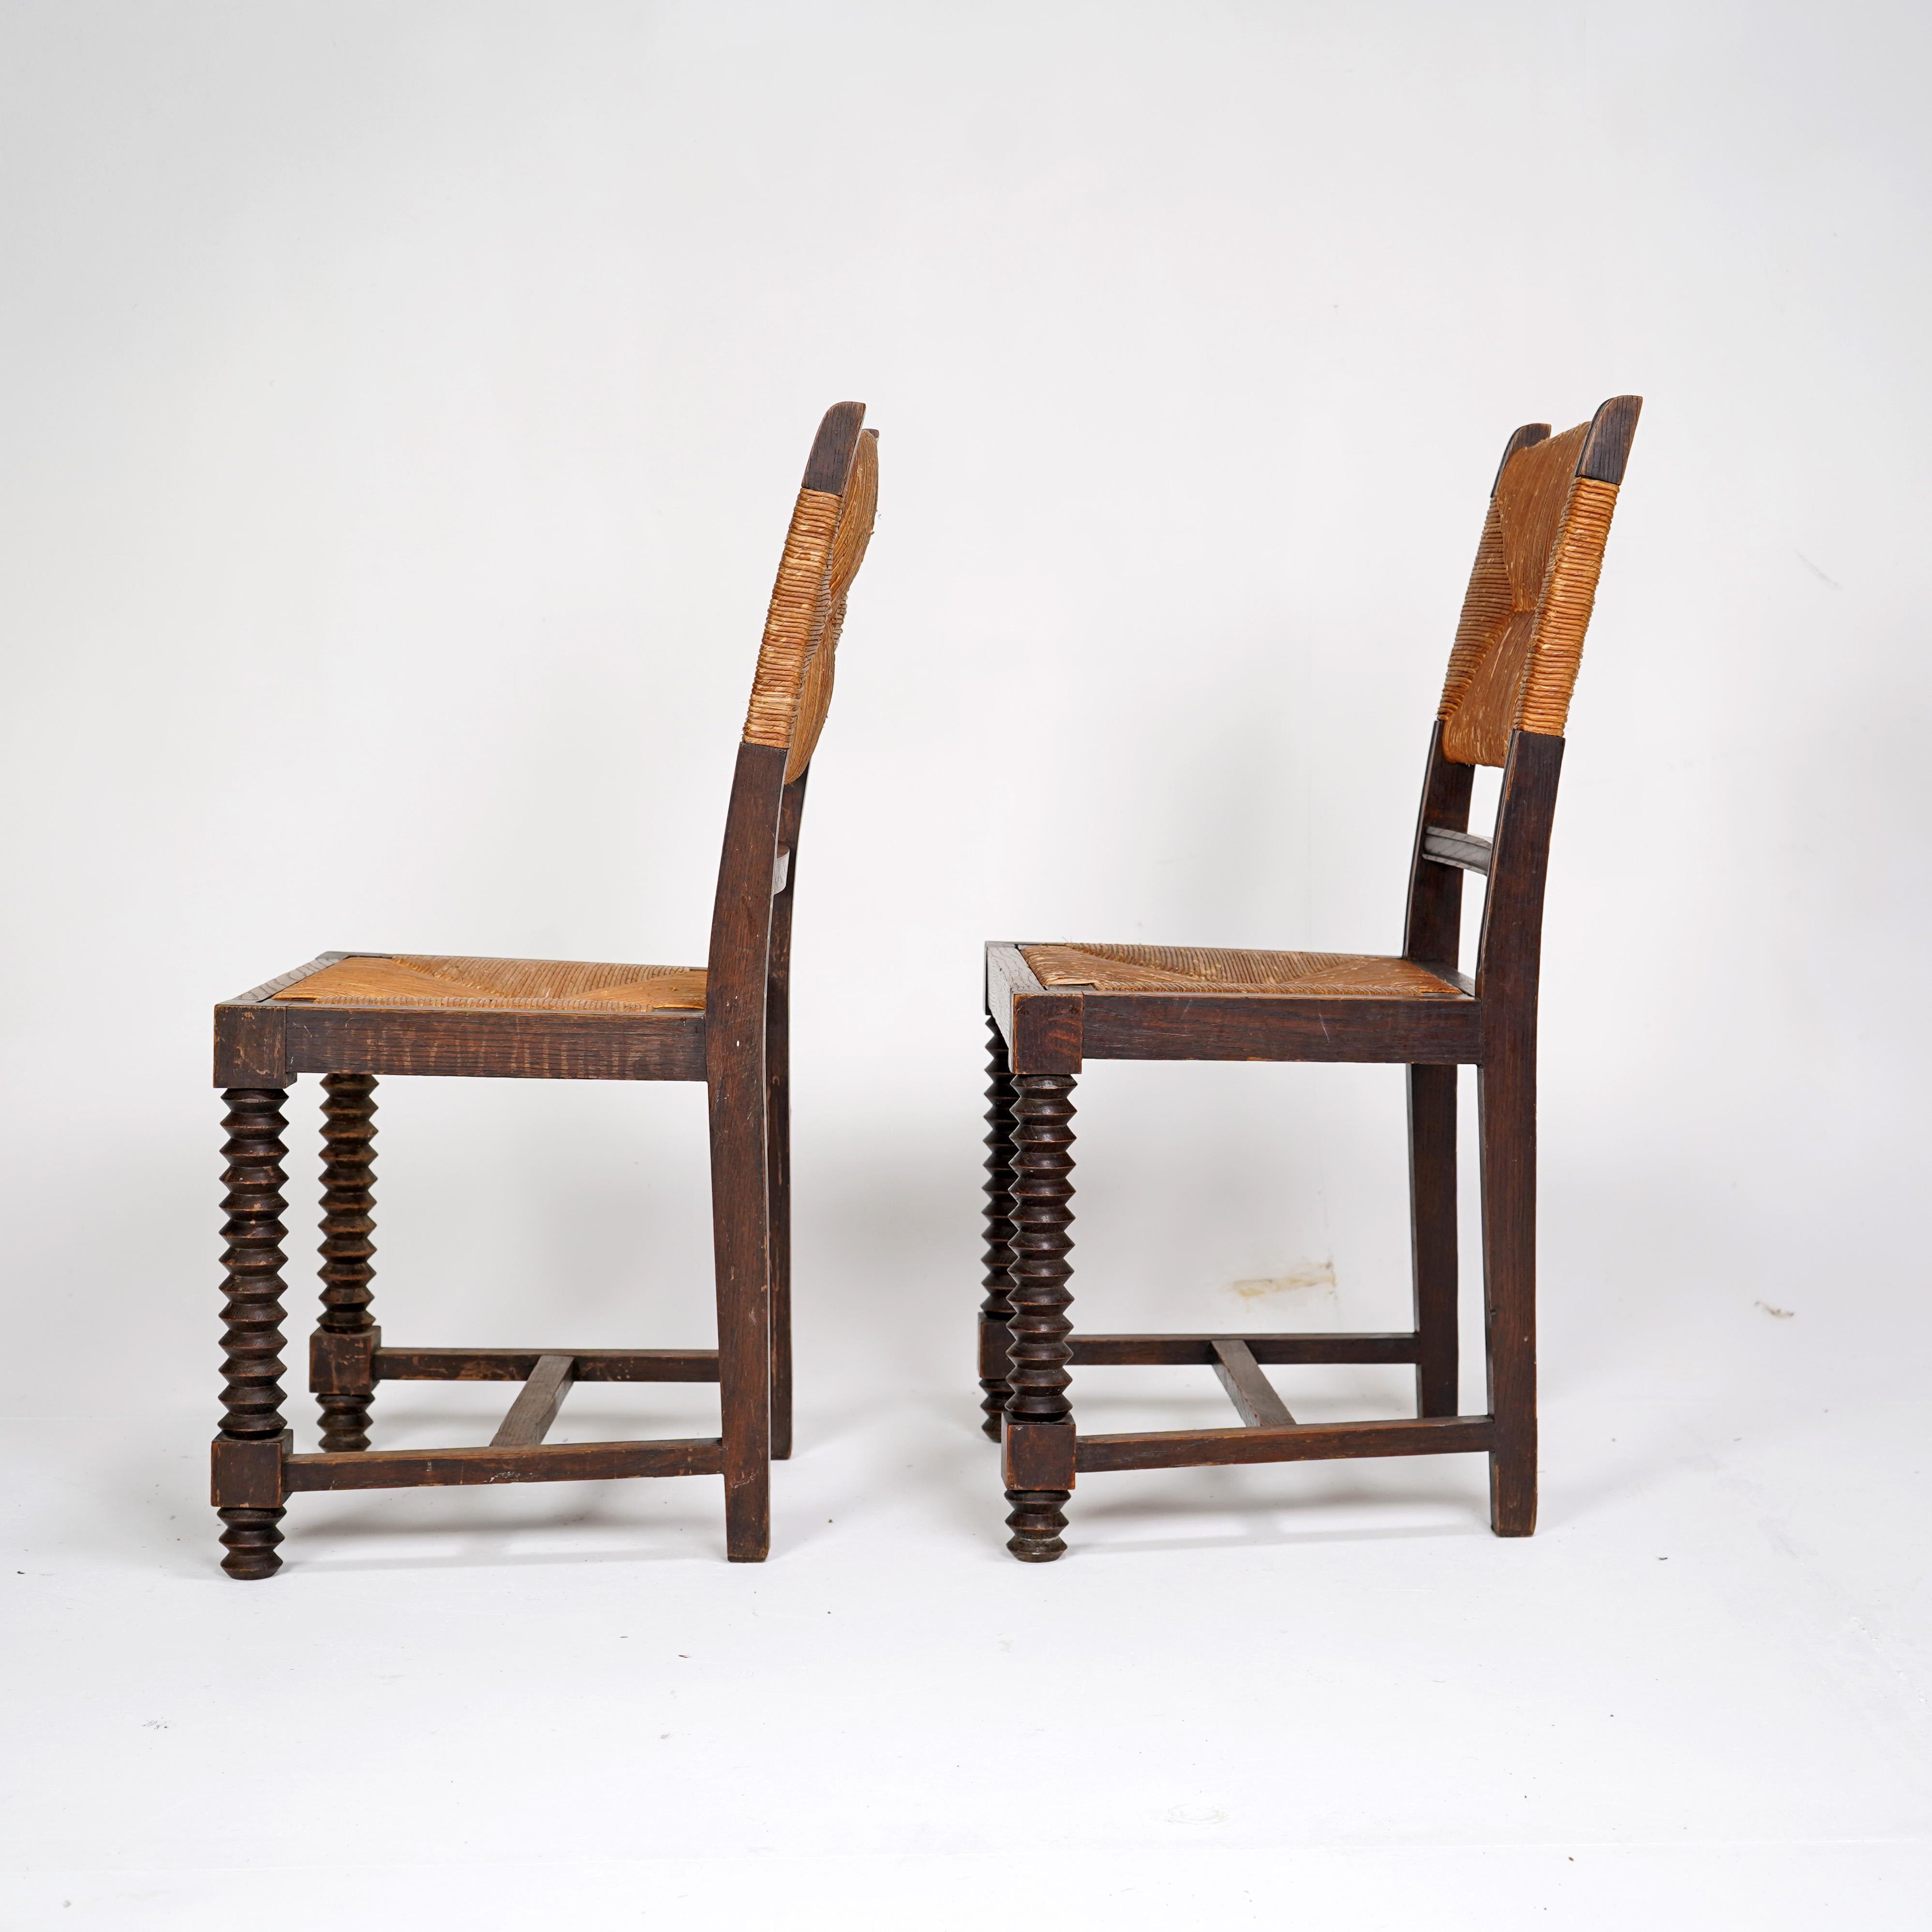 20th Century Pair Of French Charles Dudouyt Style Chairs - Wooden with Rush Seat For Sale